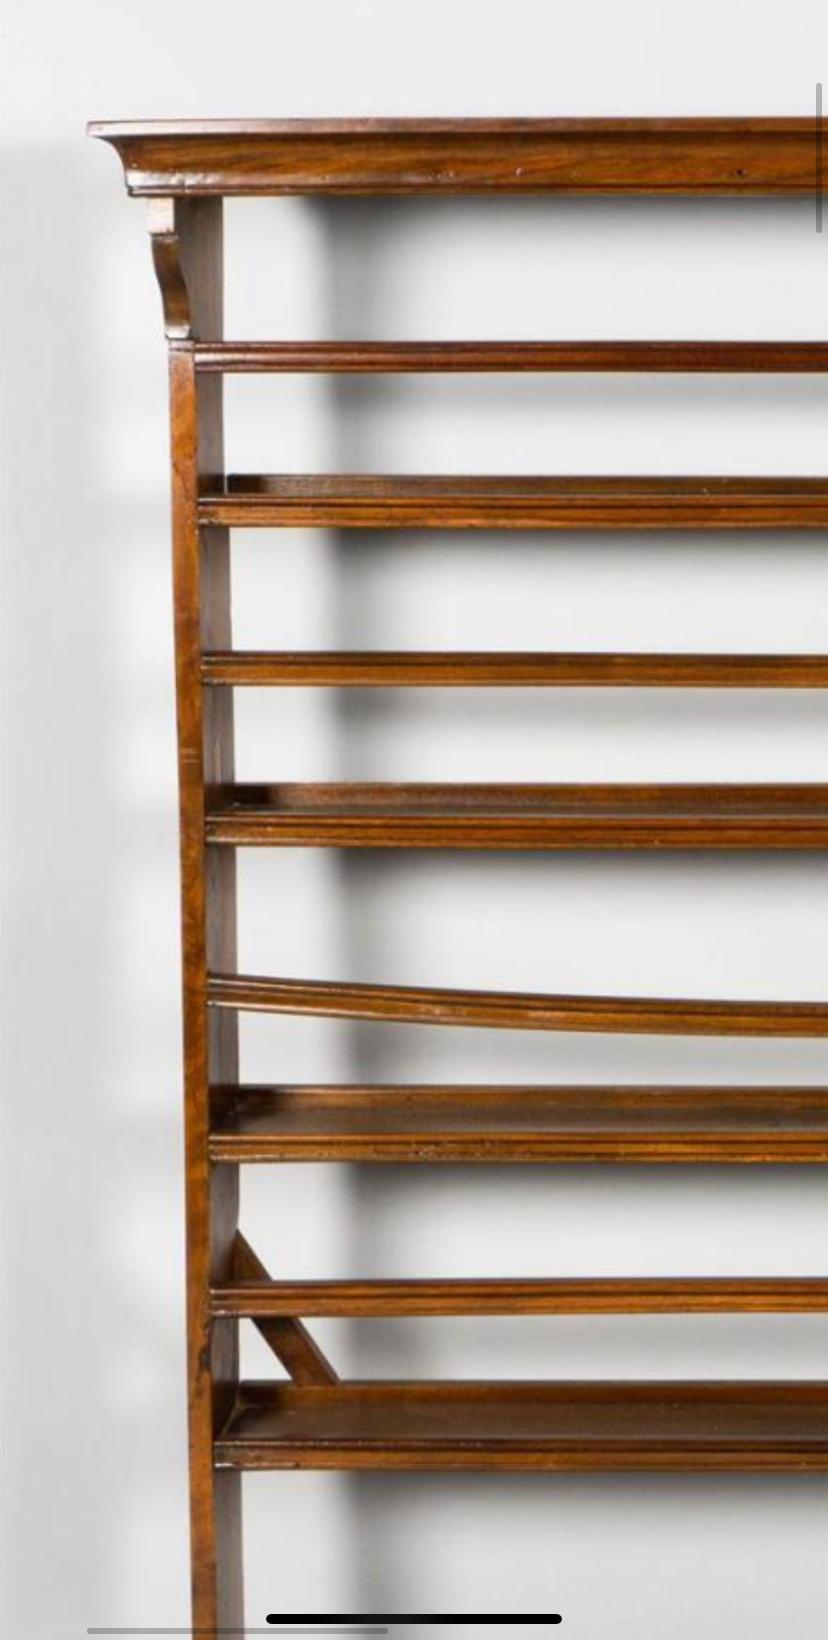 Early 19th Century American mahogany plate rack with two drawers
United State, circa 1820
Measures: 54